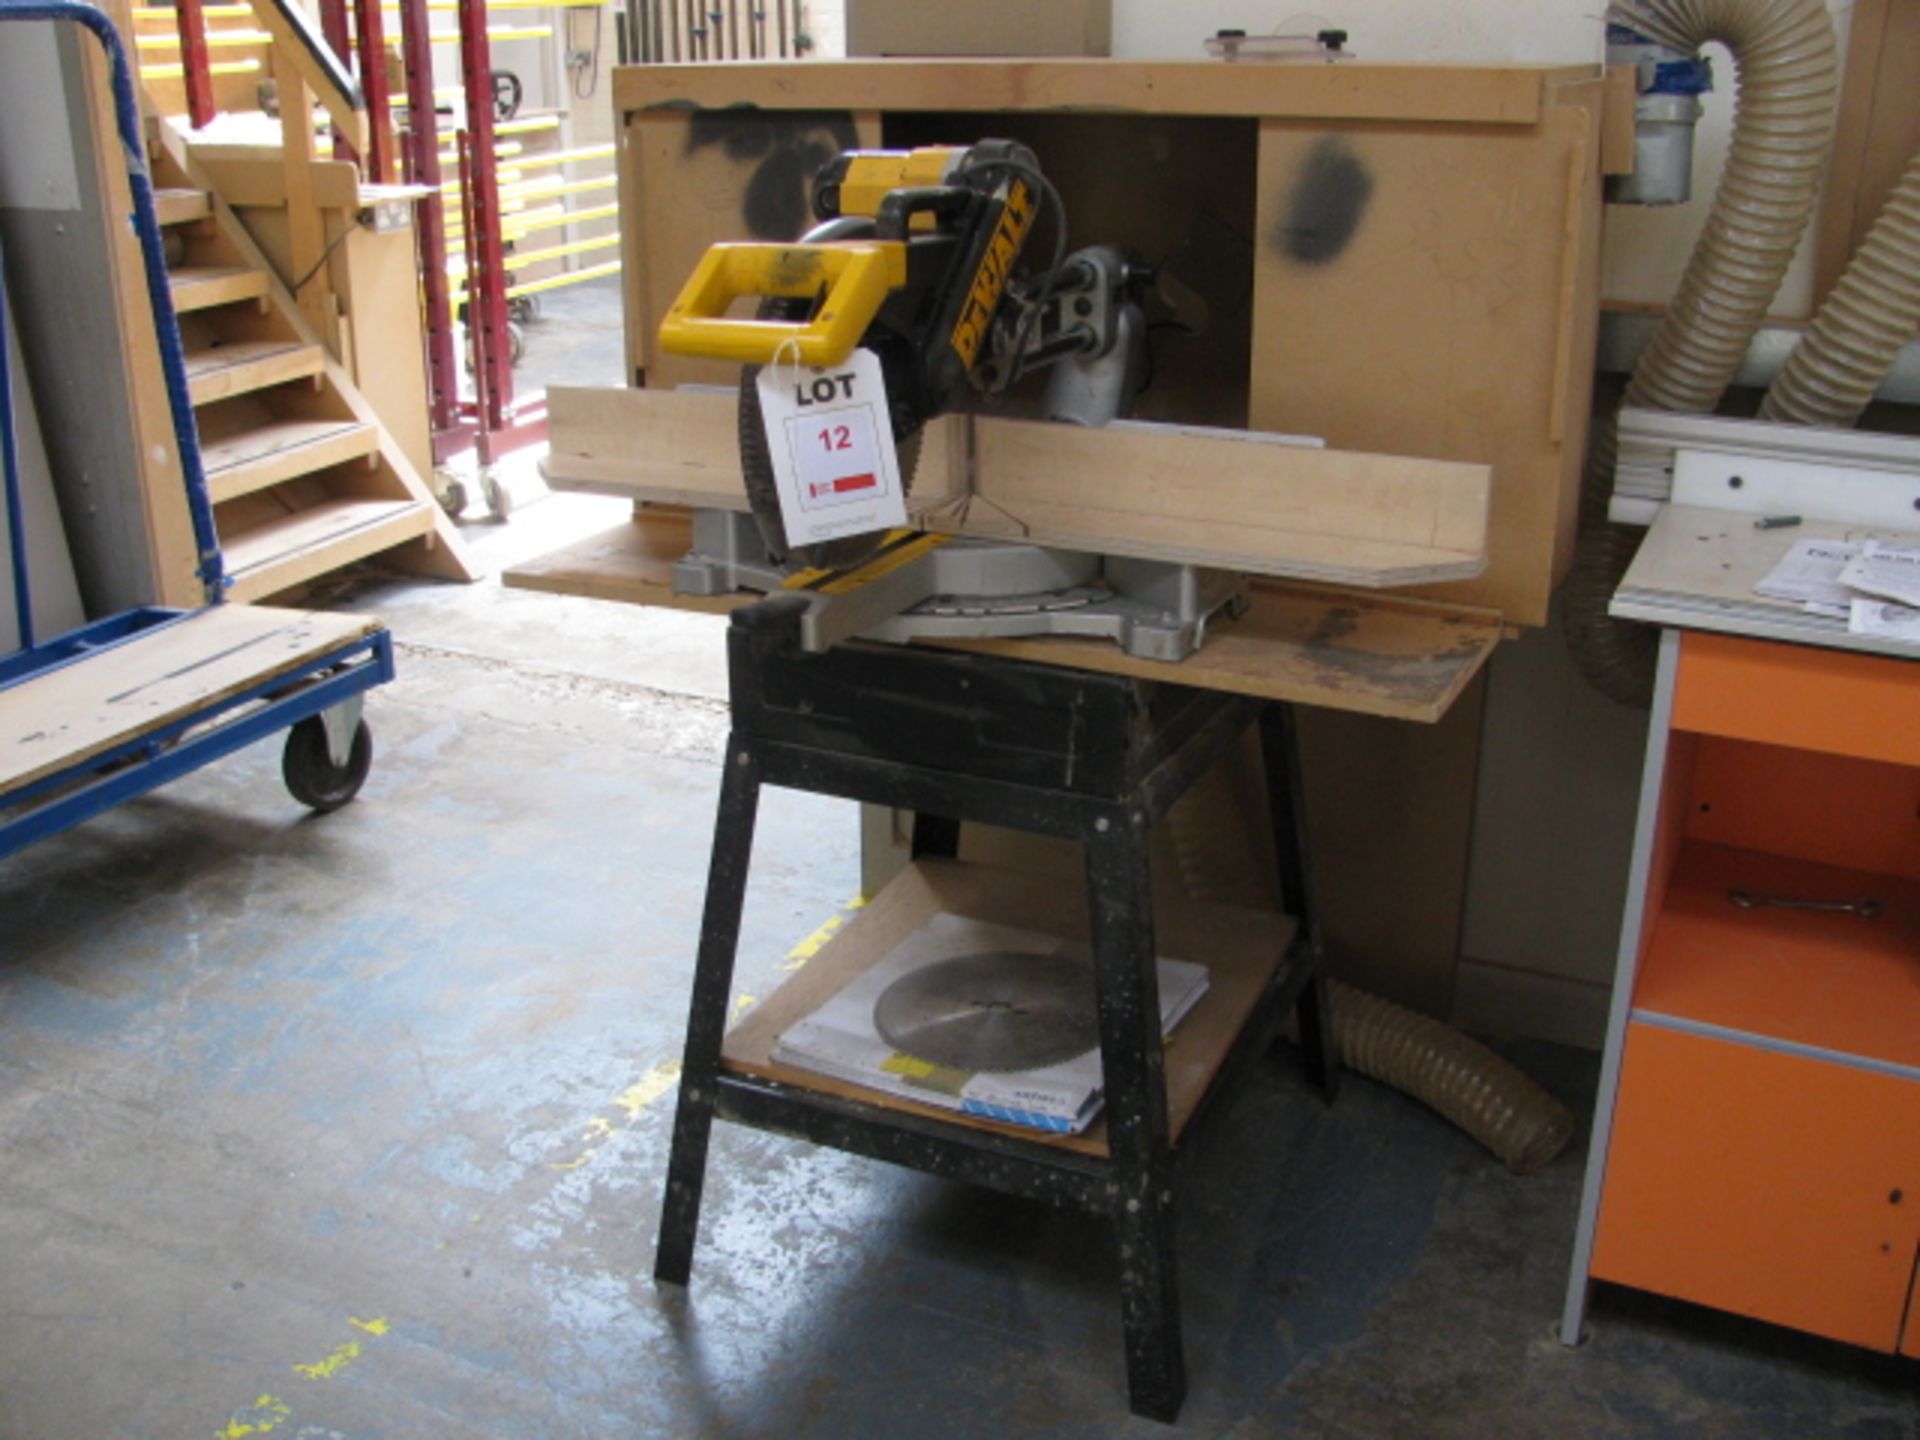 Dewalt DW708-gb radial arm cross cut saw (Please ensure sufficient resource / handling aids are used